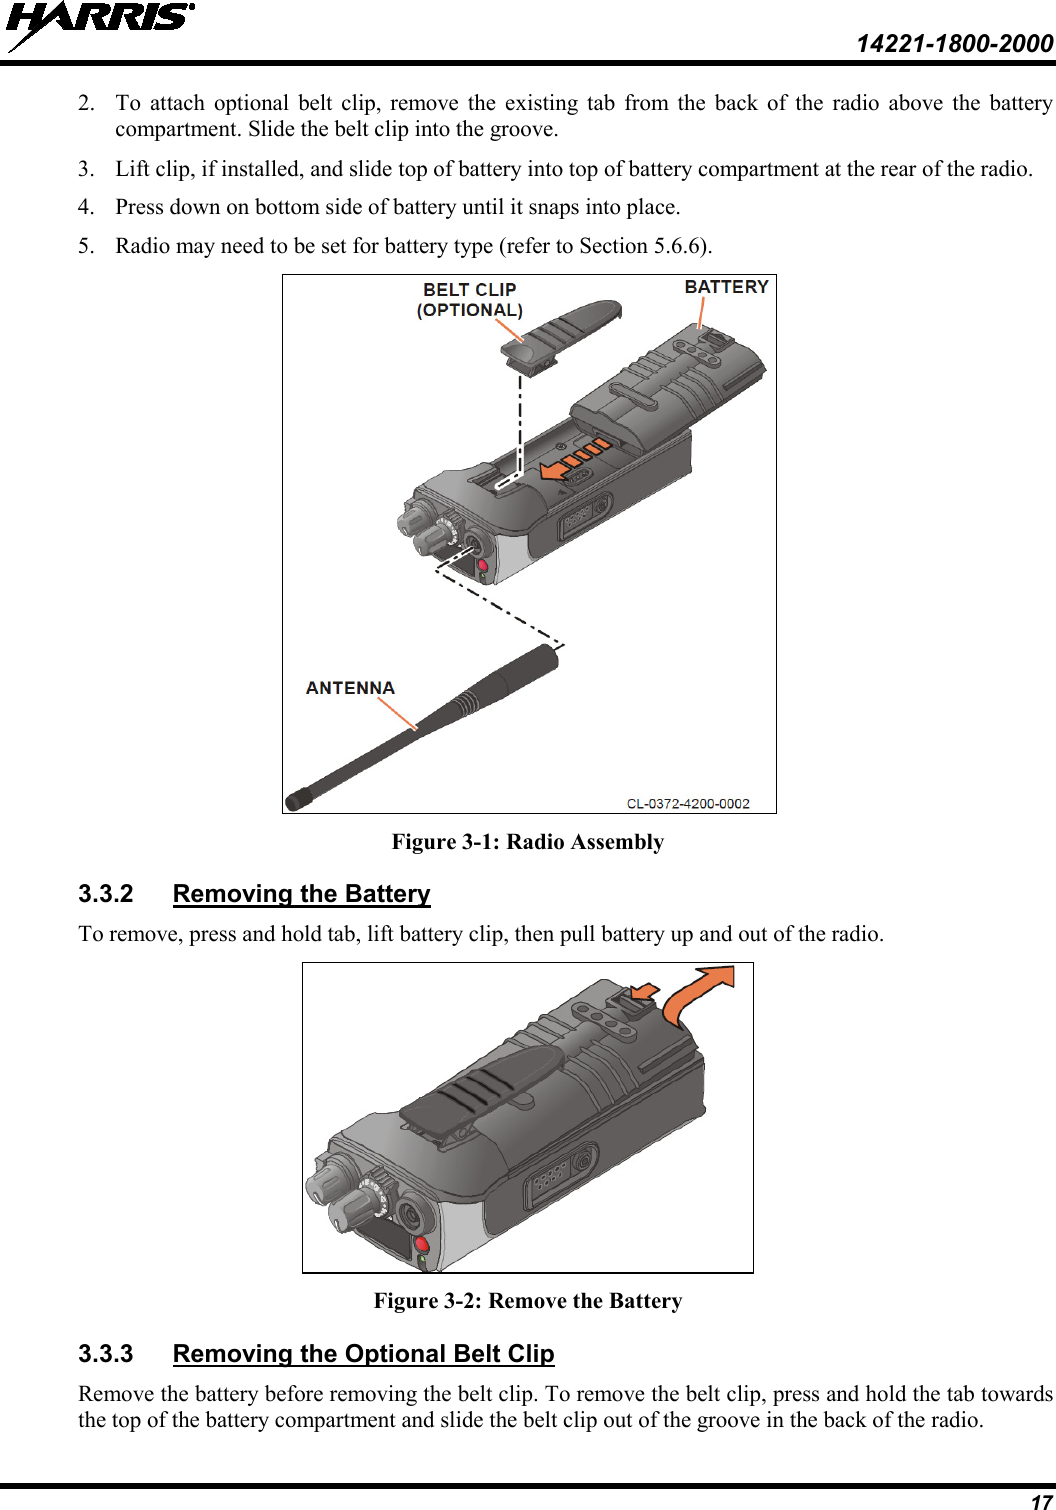  14221-1800-2000 17 2. To attach optional belt  clip,  remove the existing tab from the back of the radio above the battery compartment. Slide the belt clip into the groove. 3. Lift clip, if installed, and slide top of battery into top of battery compartment at the rear of the radio. 4. Press down on bottom side of battery until it snaps into place.  5. Radio may need to be set for battery type (refer to Section 5.6.6).  Figure 3-1: Radio Assembly 3.3.2 To remove, press and hold tab, lift battery clip, then pull battery up and out of the radio. Removing the Battery  Figure 3-2: Remove the Battery 3.3.3 Remove the battery before removing the belt clip. To remove the belt clip, press and hold the tab towards the top of the battery compartment and slide the belt clip out of the groove in the back of the radio. Removing the Optional Belt Clip 